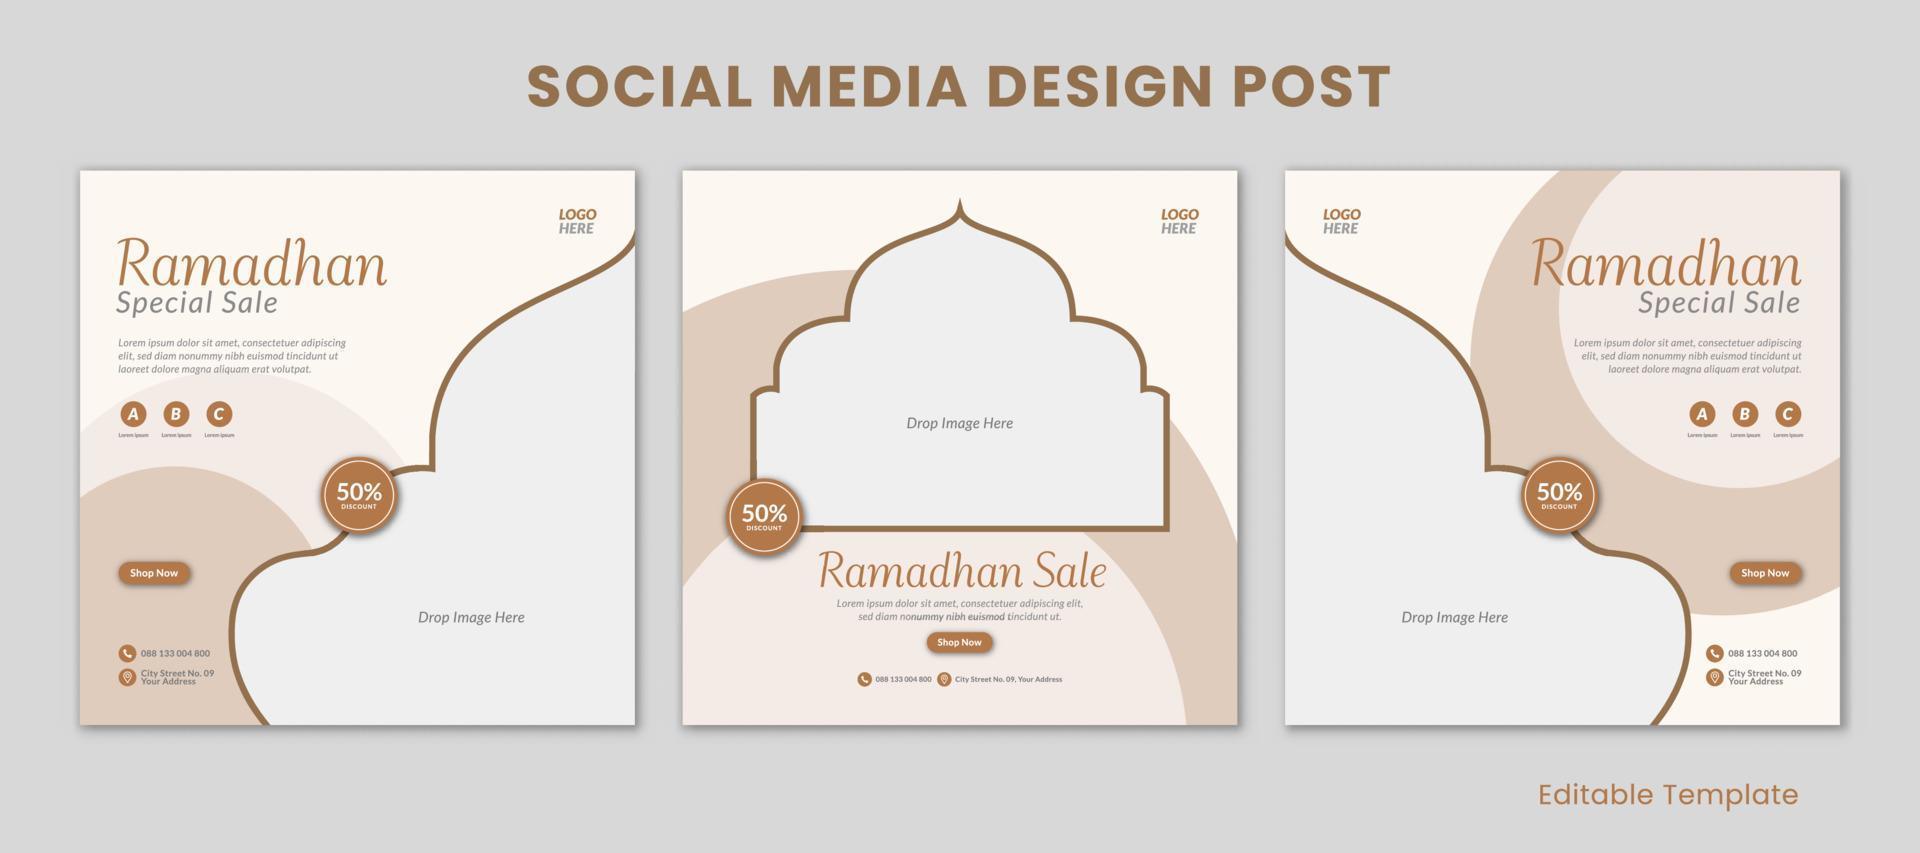 Set of 3 Editable Templates Ramadhan Social Media Design Post. Suitable for Sale Banner, Promotion, Presentation, Advertising, Fashion, coffee shop vector